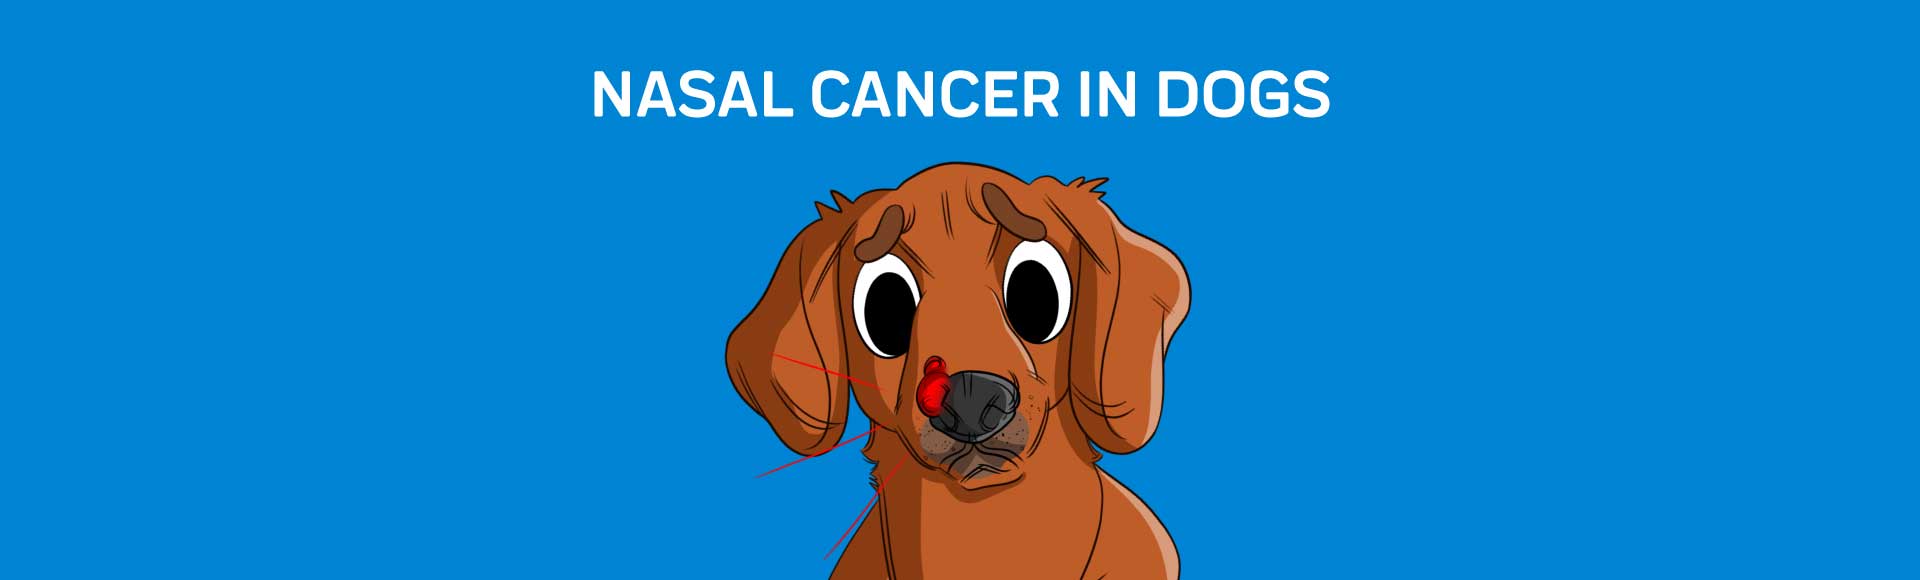 how common is nasal cancer in dogs